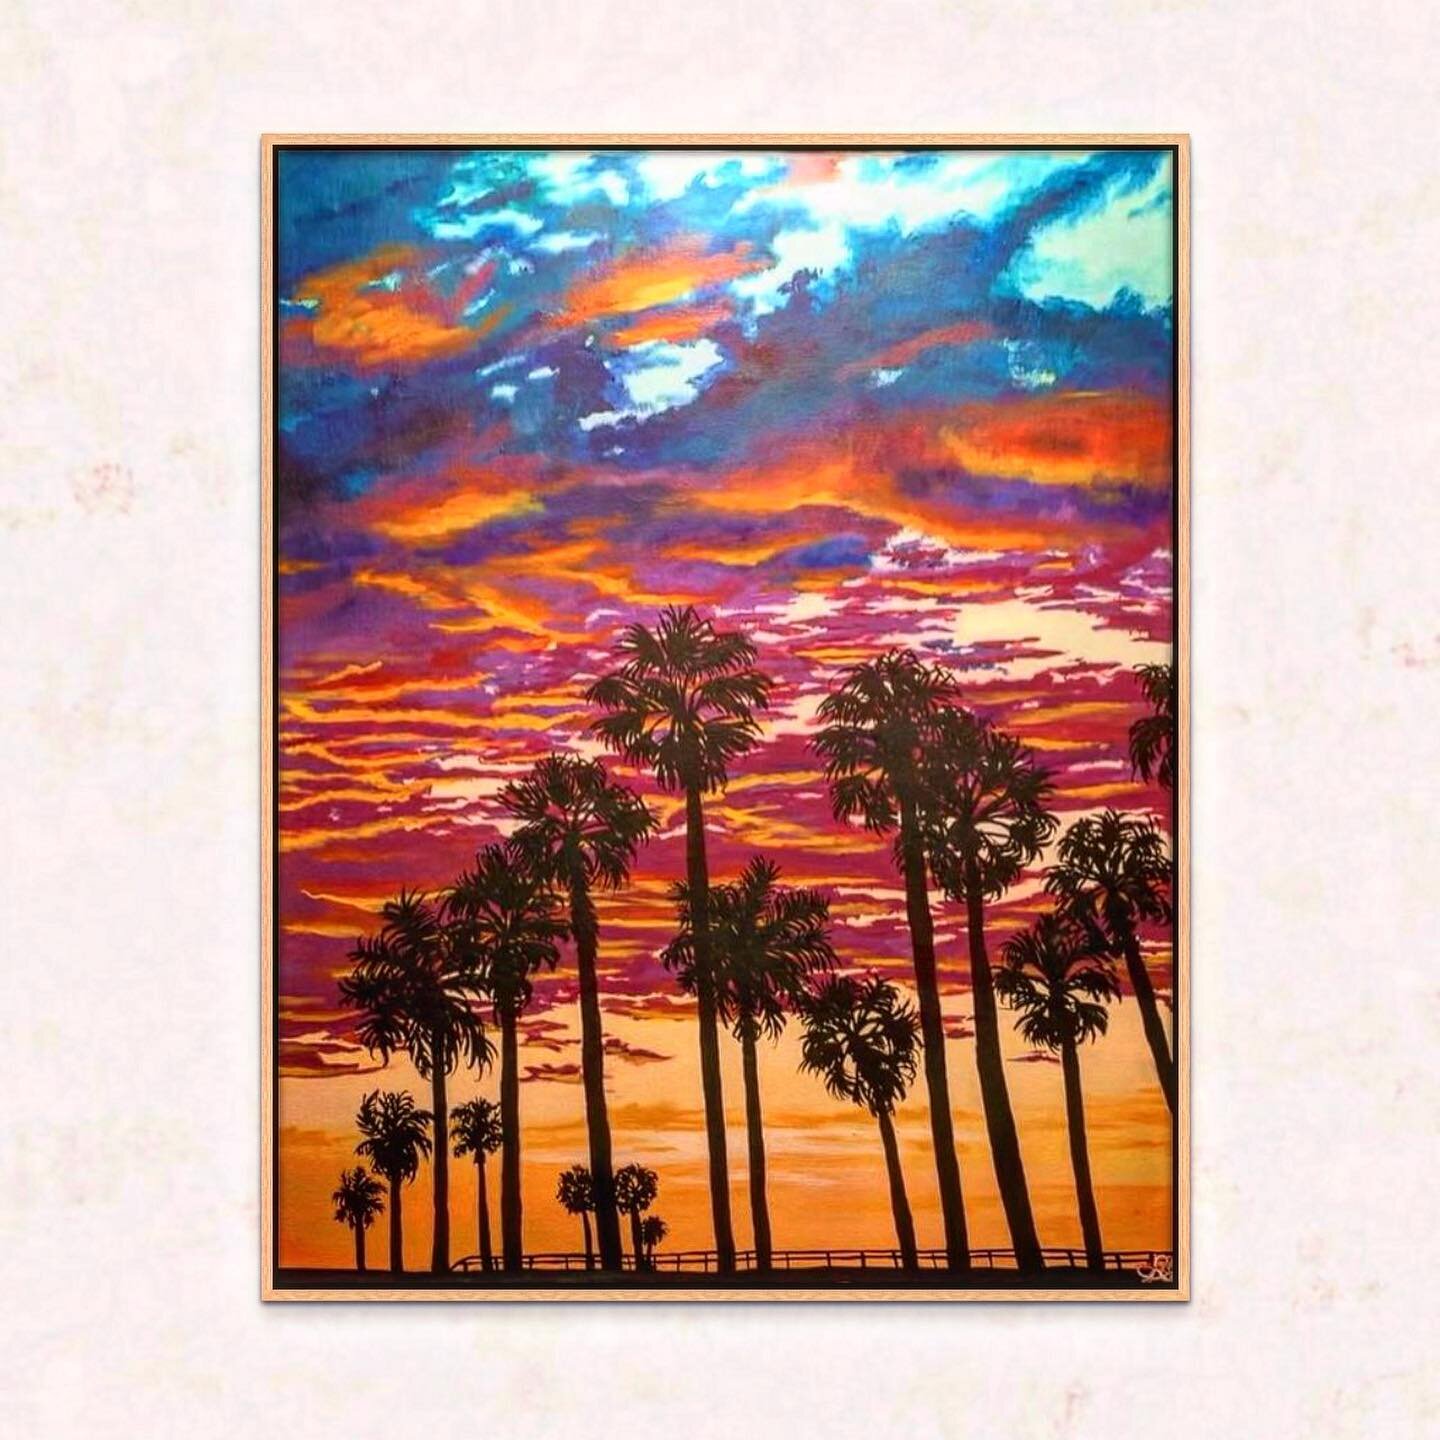 🌅 Sold | 2020 🌅

A vibrant piece with inspiration from @ryanlongnecker